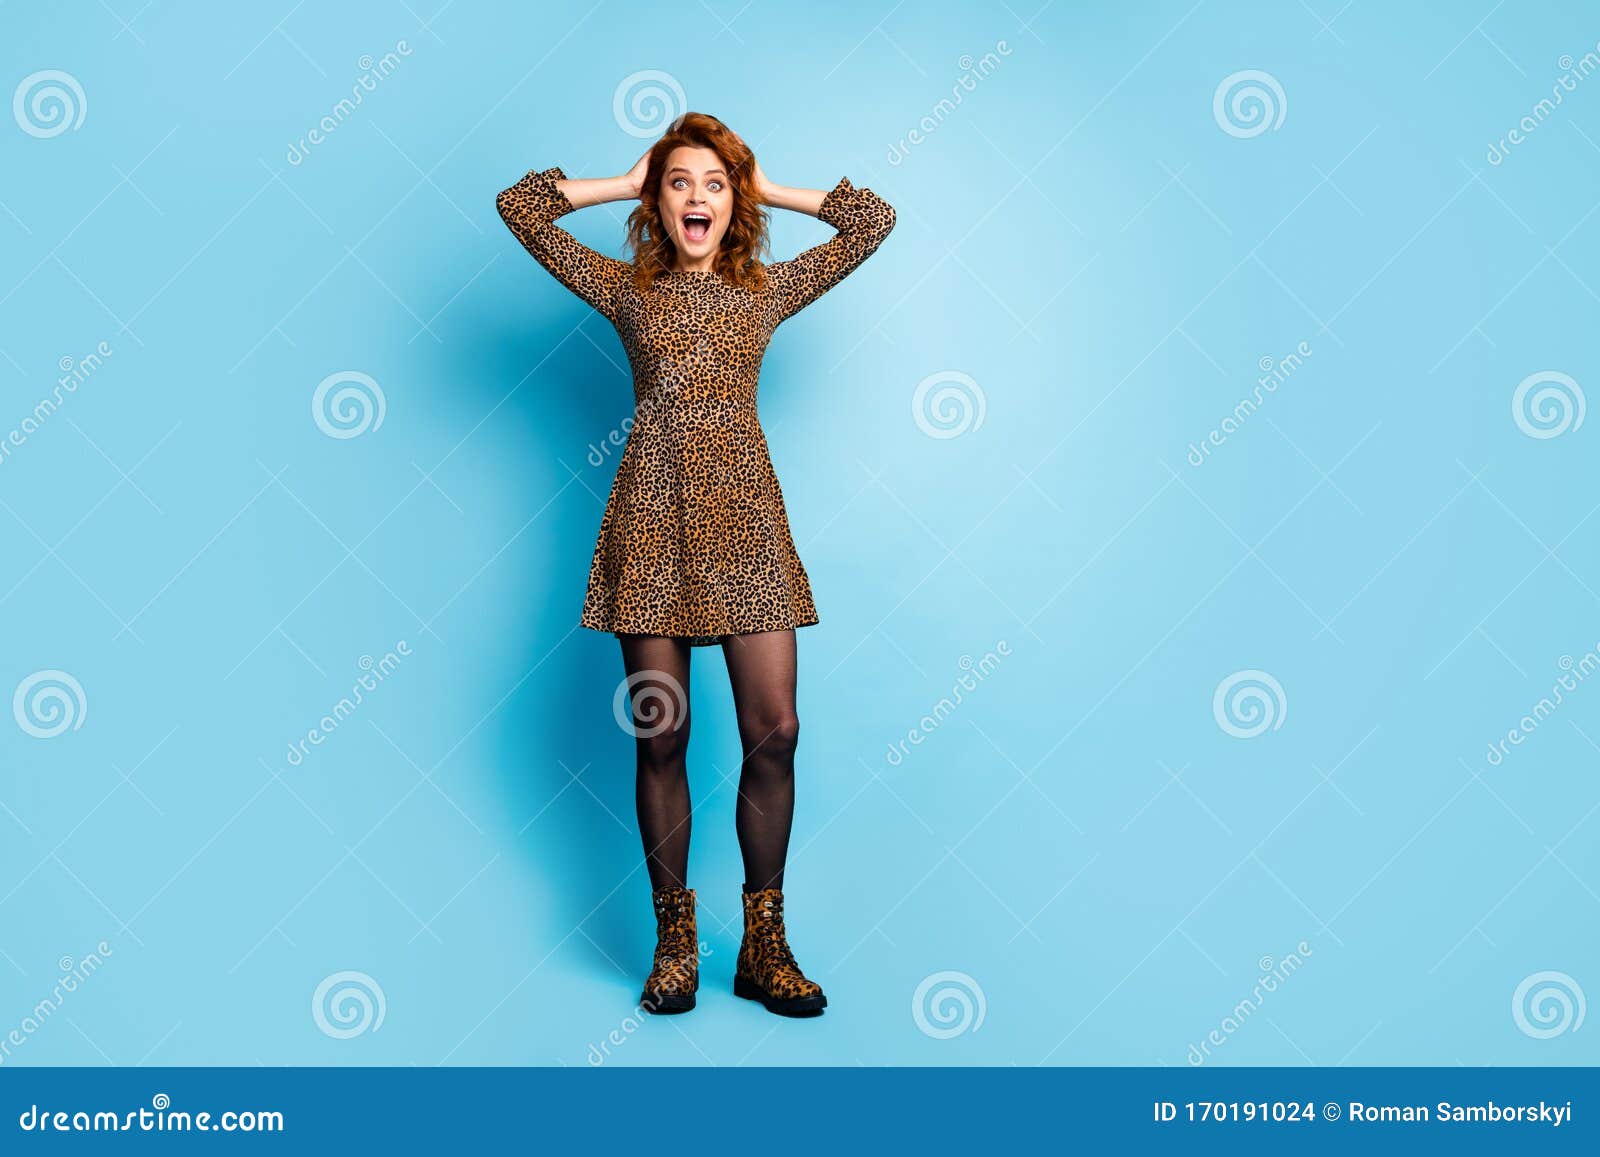 Full Body Photo Of Astonished Crazy Woman Look Unbelievable Incredible Novelty Promo Shout Wow Omg Touch Hands Hairstyle Stock Photo Image Of Bargain Emotions 170191024